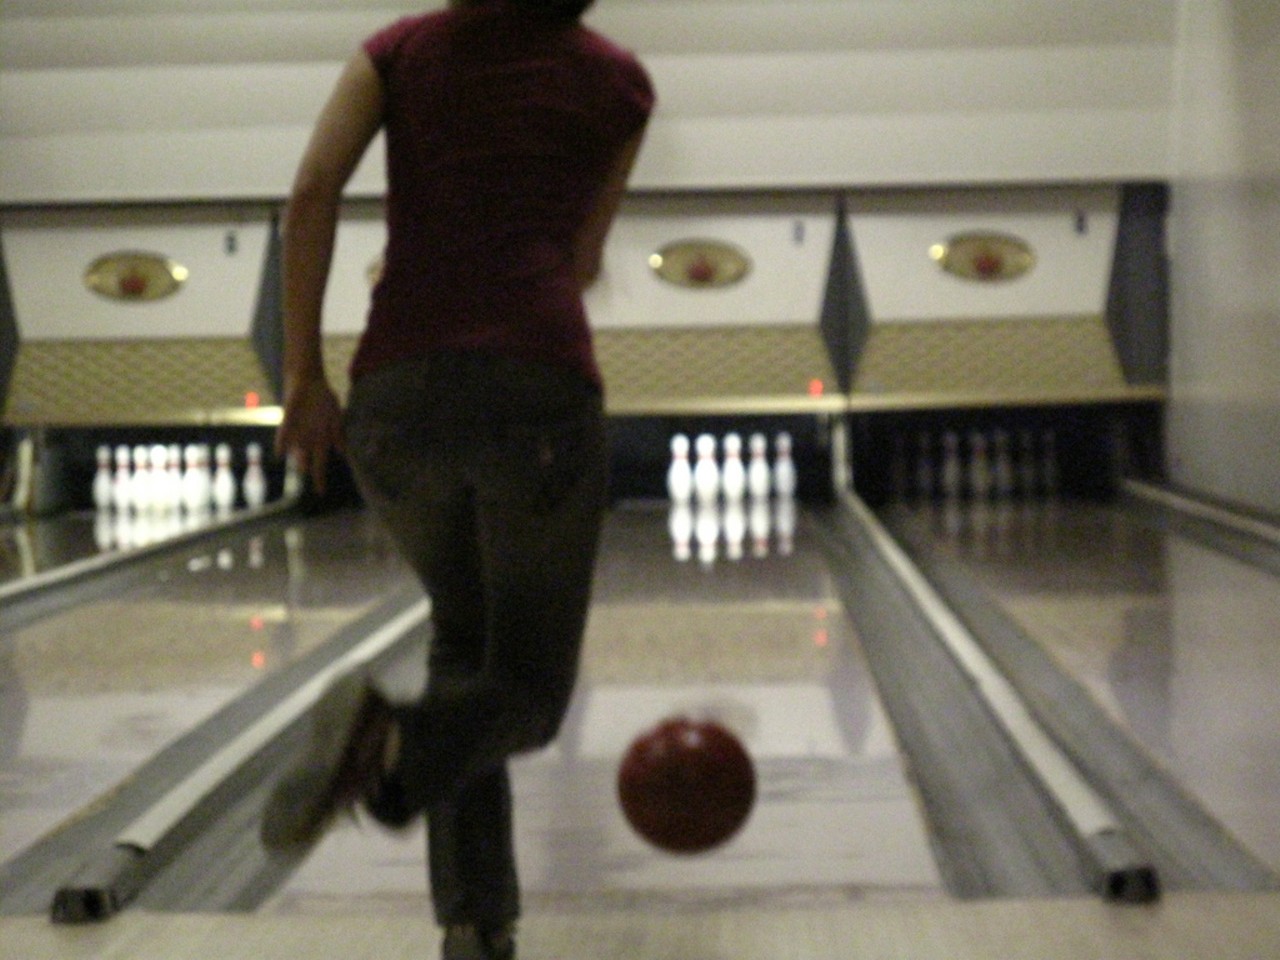 Of course, there are kids bowling at Flamingo Bowl during the day. But from 9 p.m. until close the party become adults-only, only open to patrons 21 and older. Photo courtesy of Flickr / Matthew Hurst.